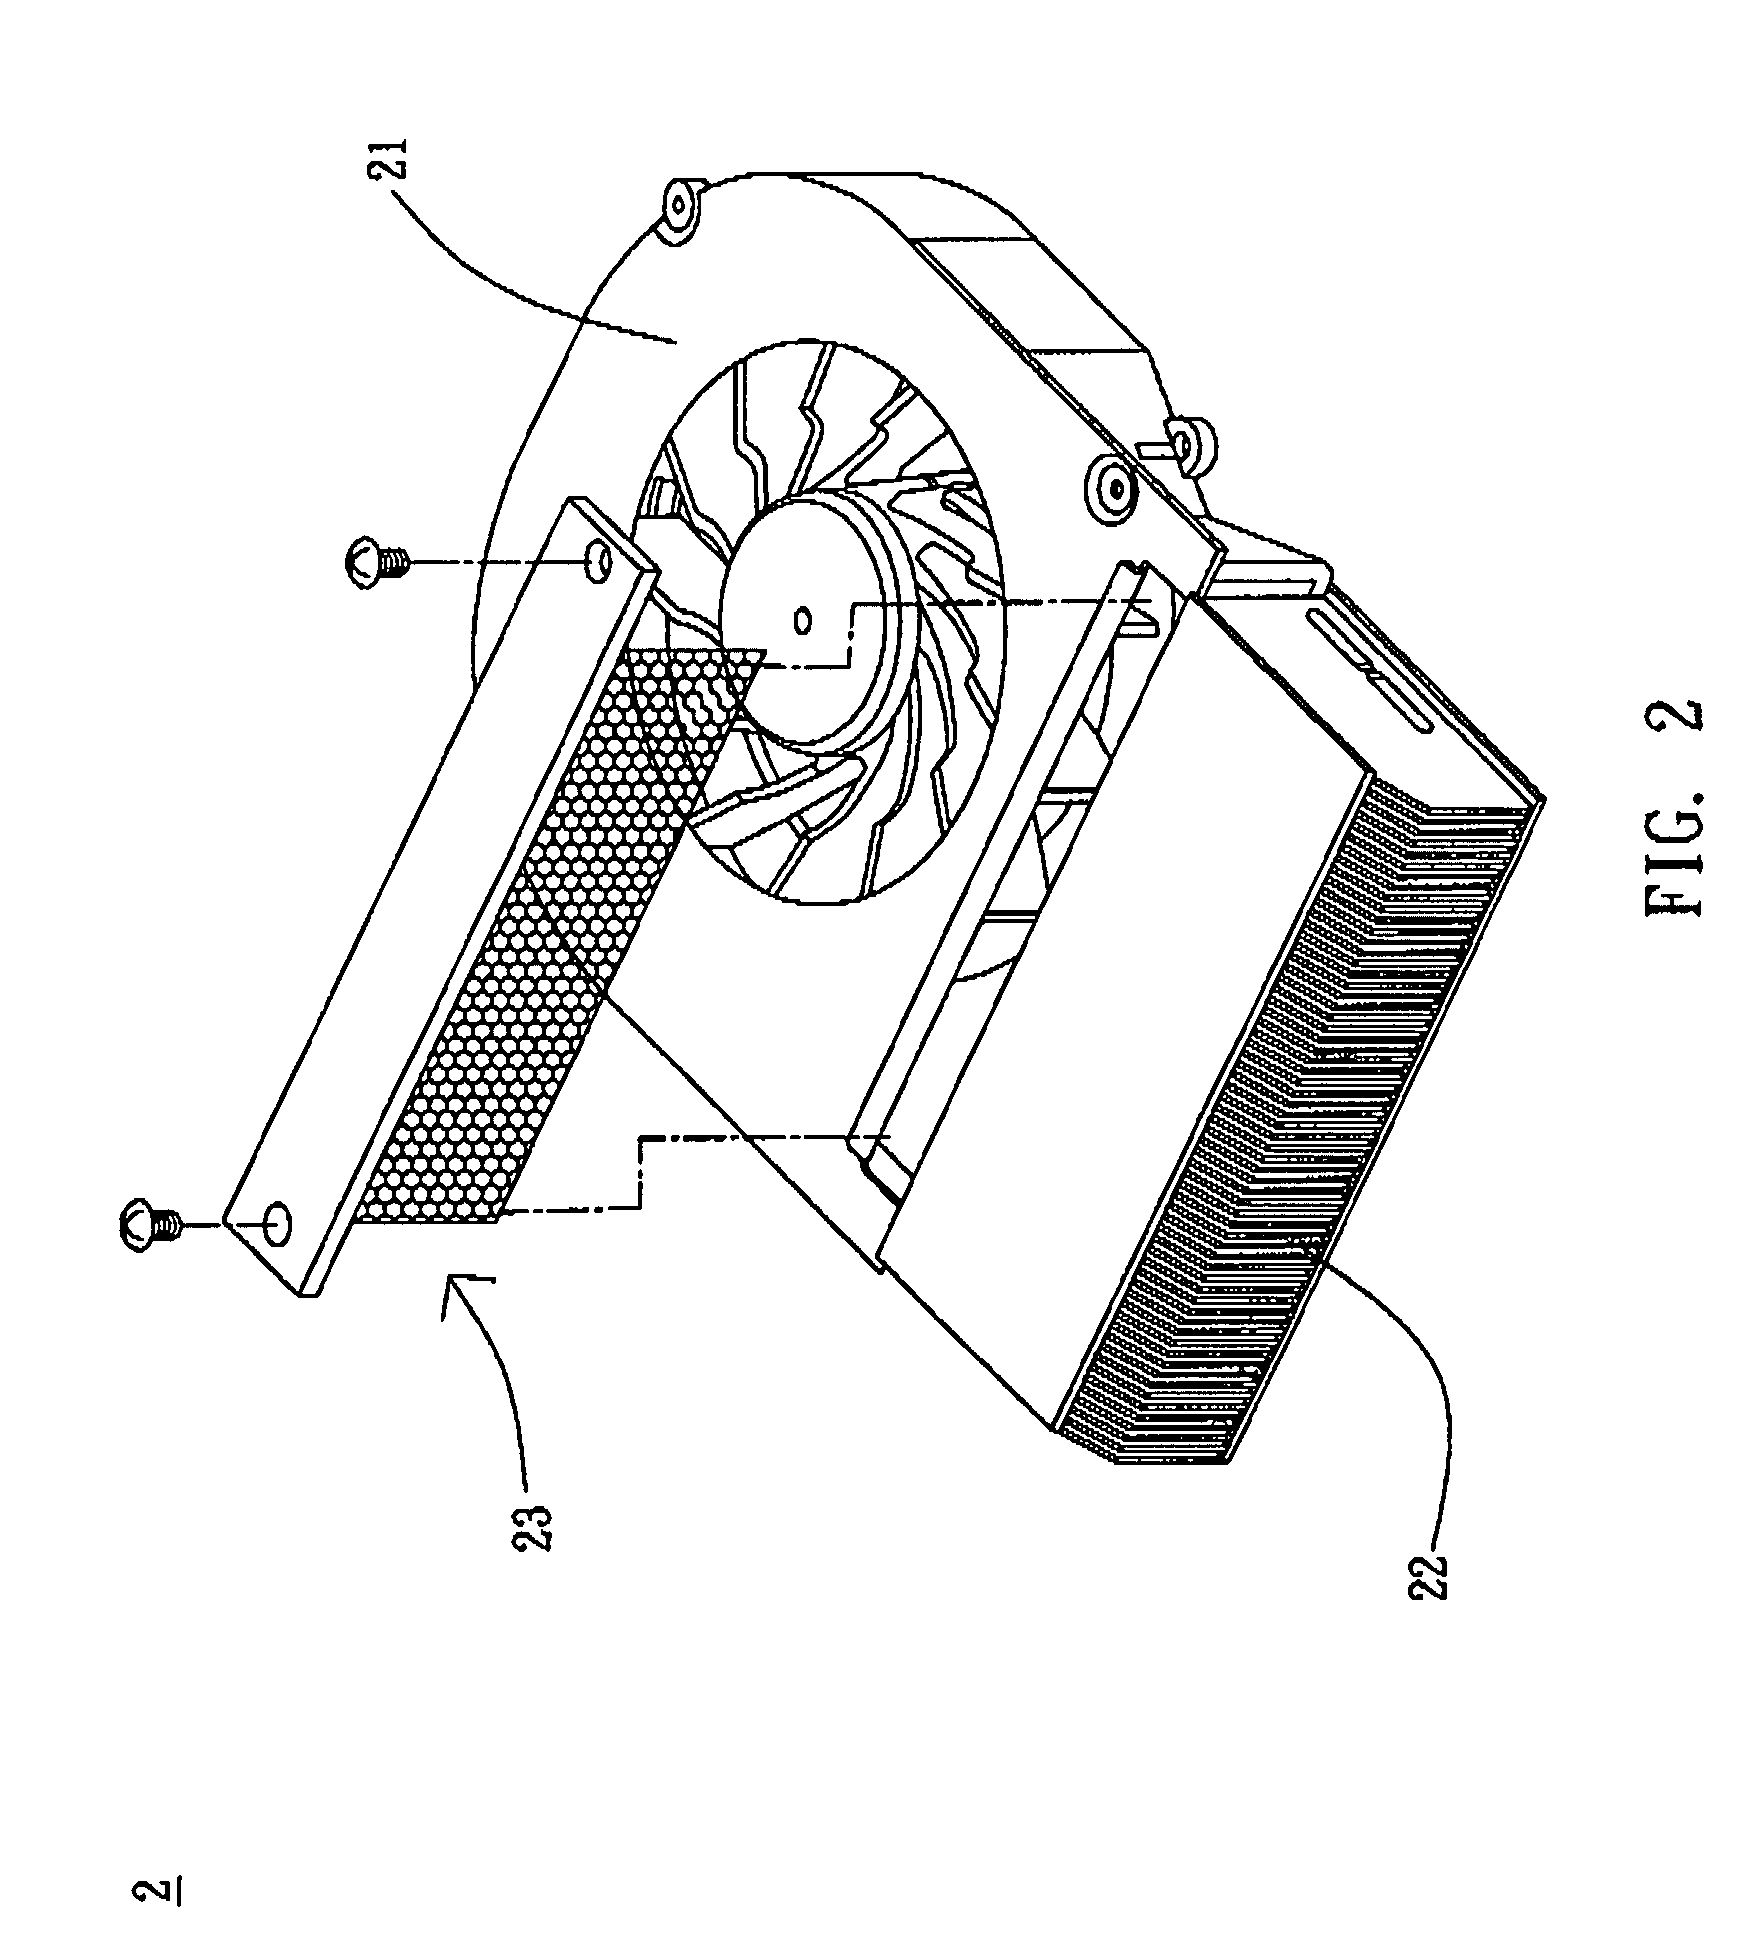 Heat spreader with filtering function and electrical apparatus